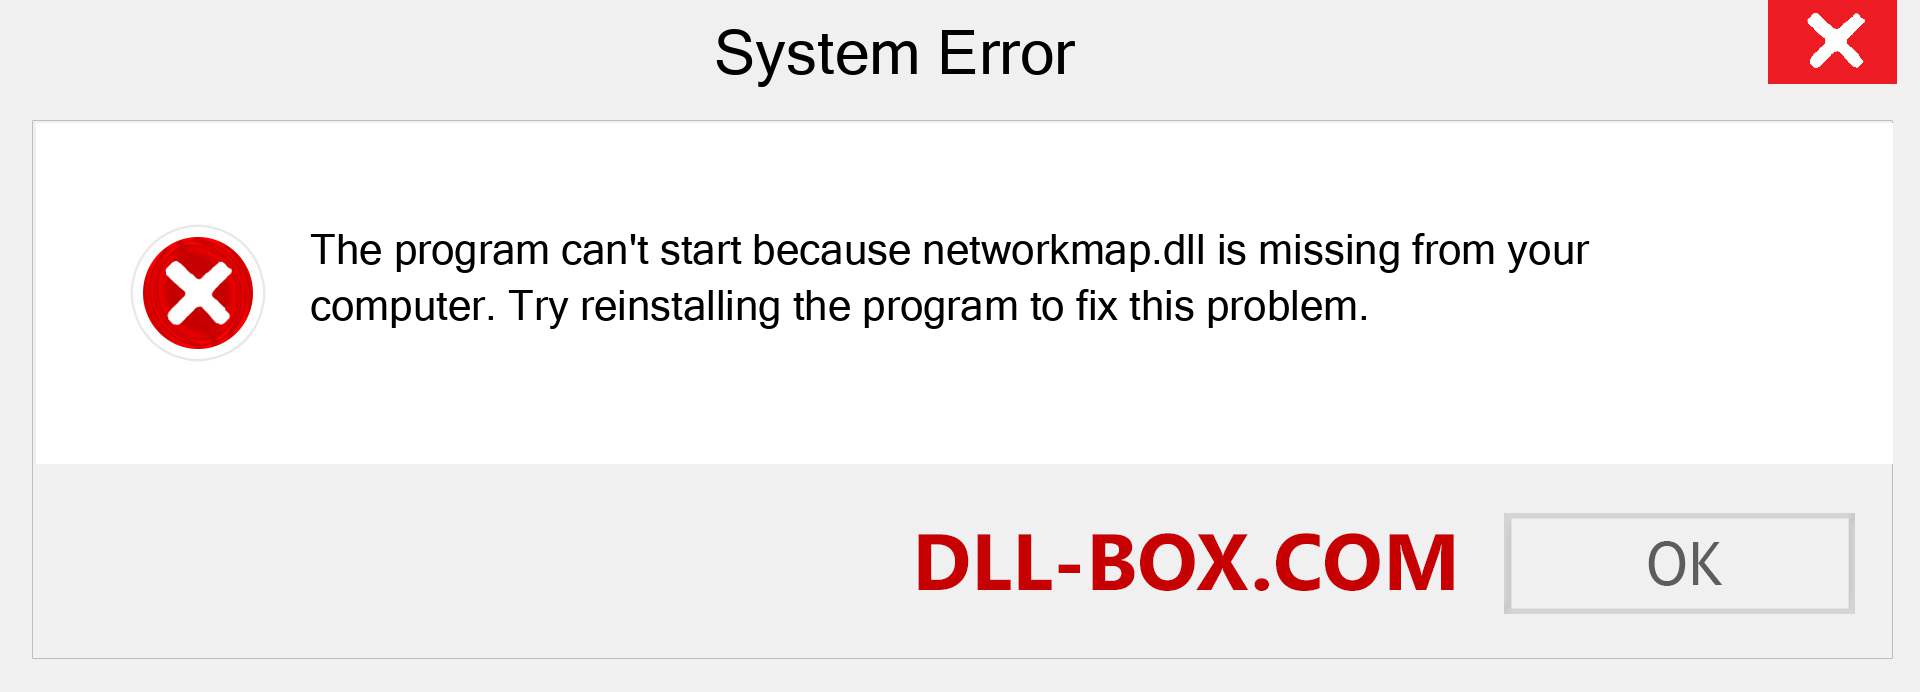  networkmap.dll file is missing?. Download for Windows 7, 8, 10 - Fix  networkmap dll Missing Error on Windows, photos, images